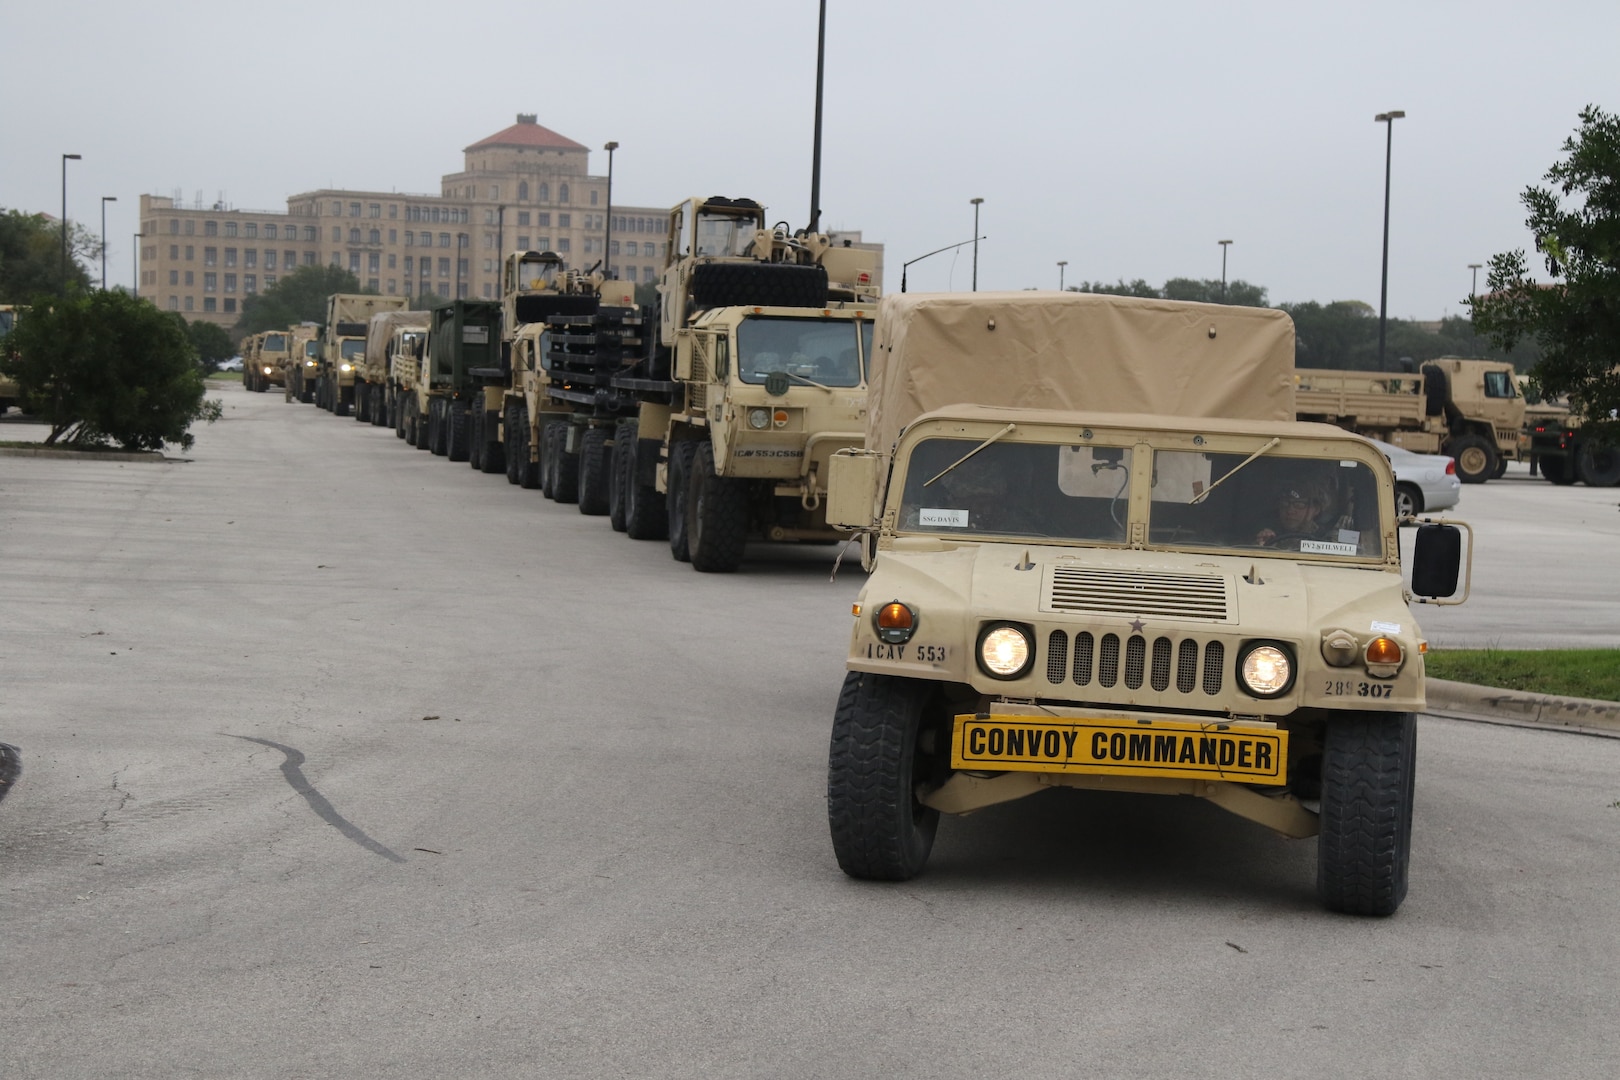 Soldiers from the 289th Quartermaster Company, 553rd Combat Sustainment Support Battalion, launch a convoy Nov. 5 from Joint Base San Antonio-Fort Sam Houston in support of U.S Northern Command. USNORTHOM is providing military support to the Department of Homeland Security and U.S. Customs and Border Protection to secure the southern border of the United States.